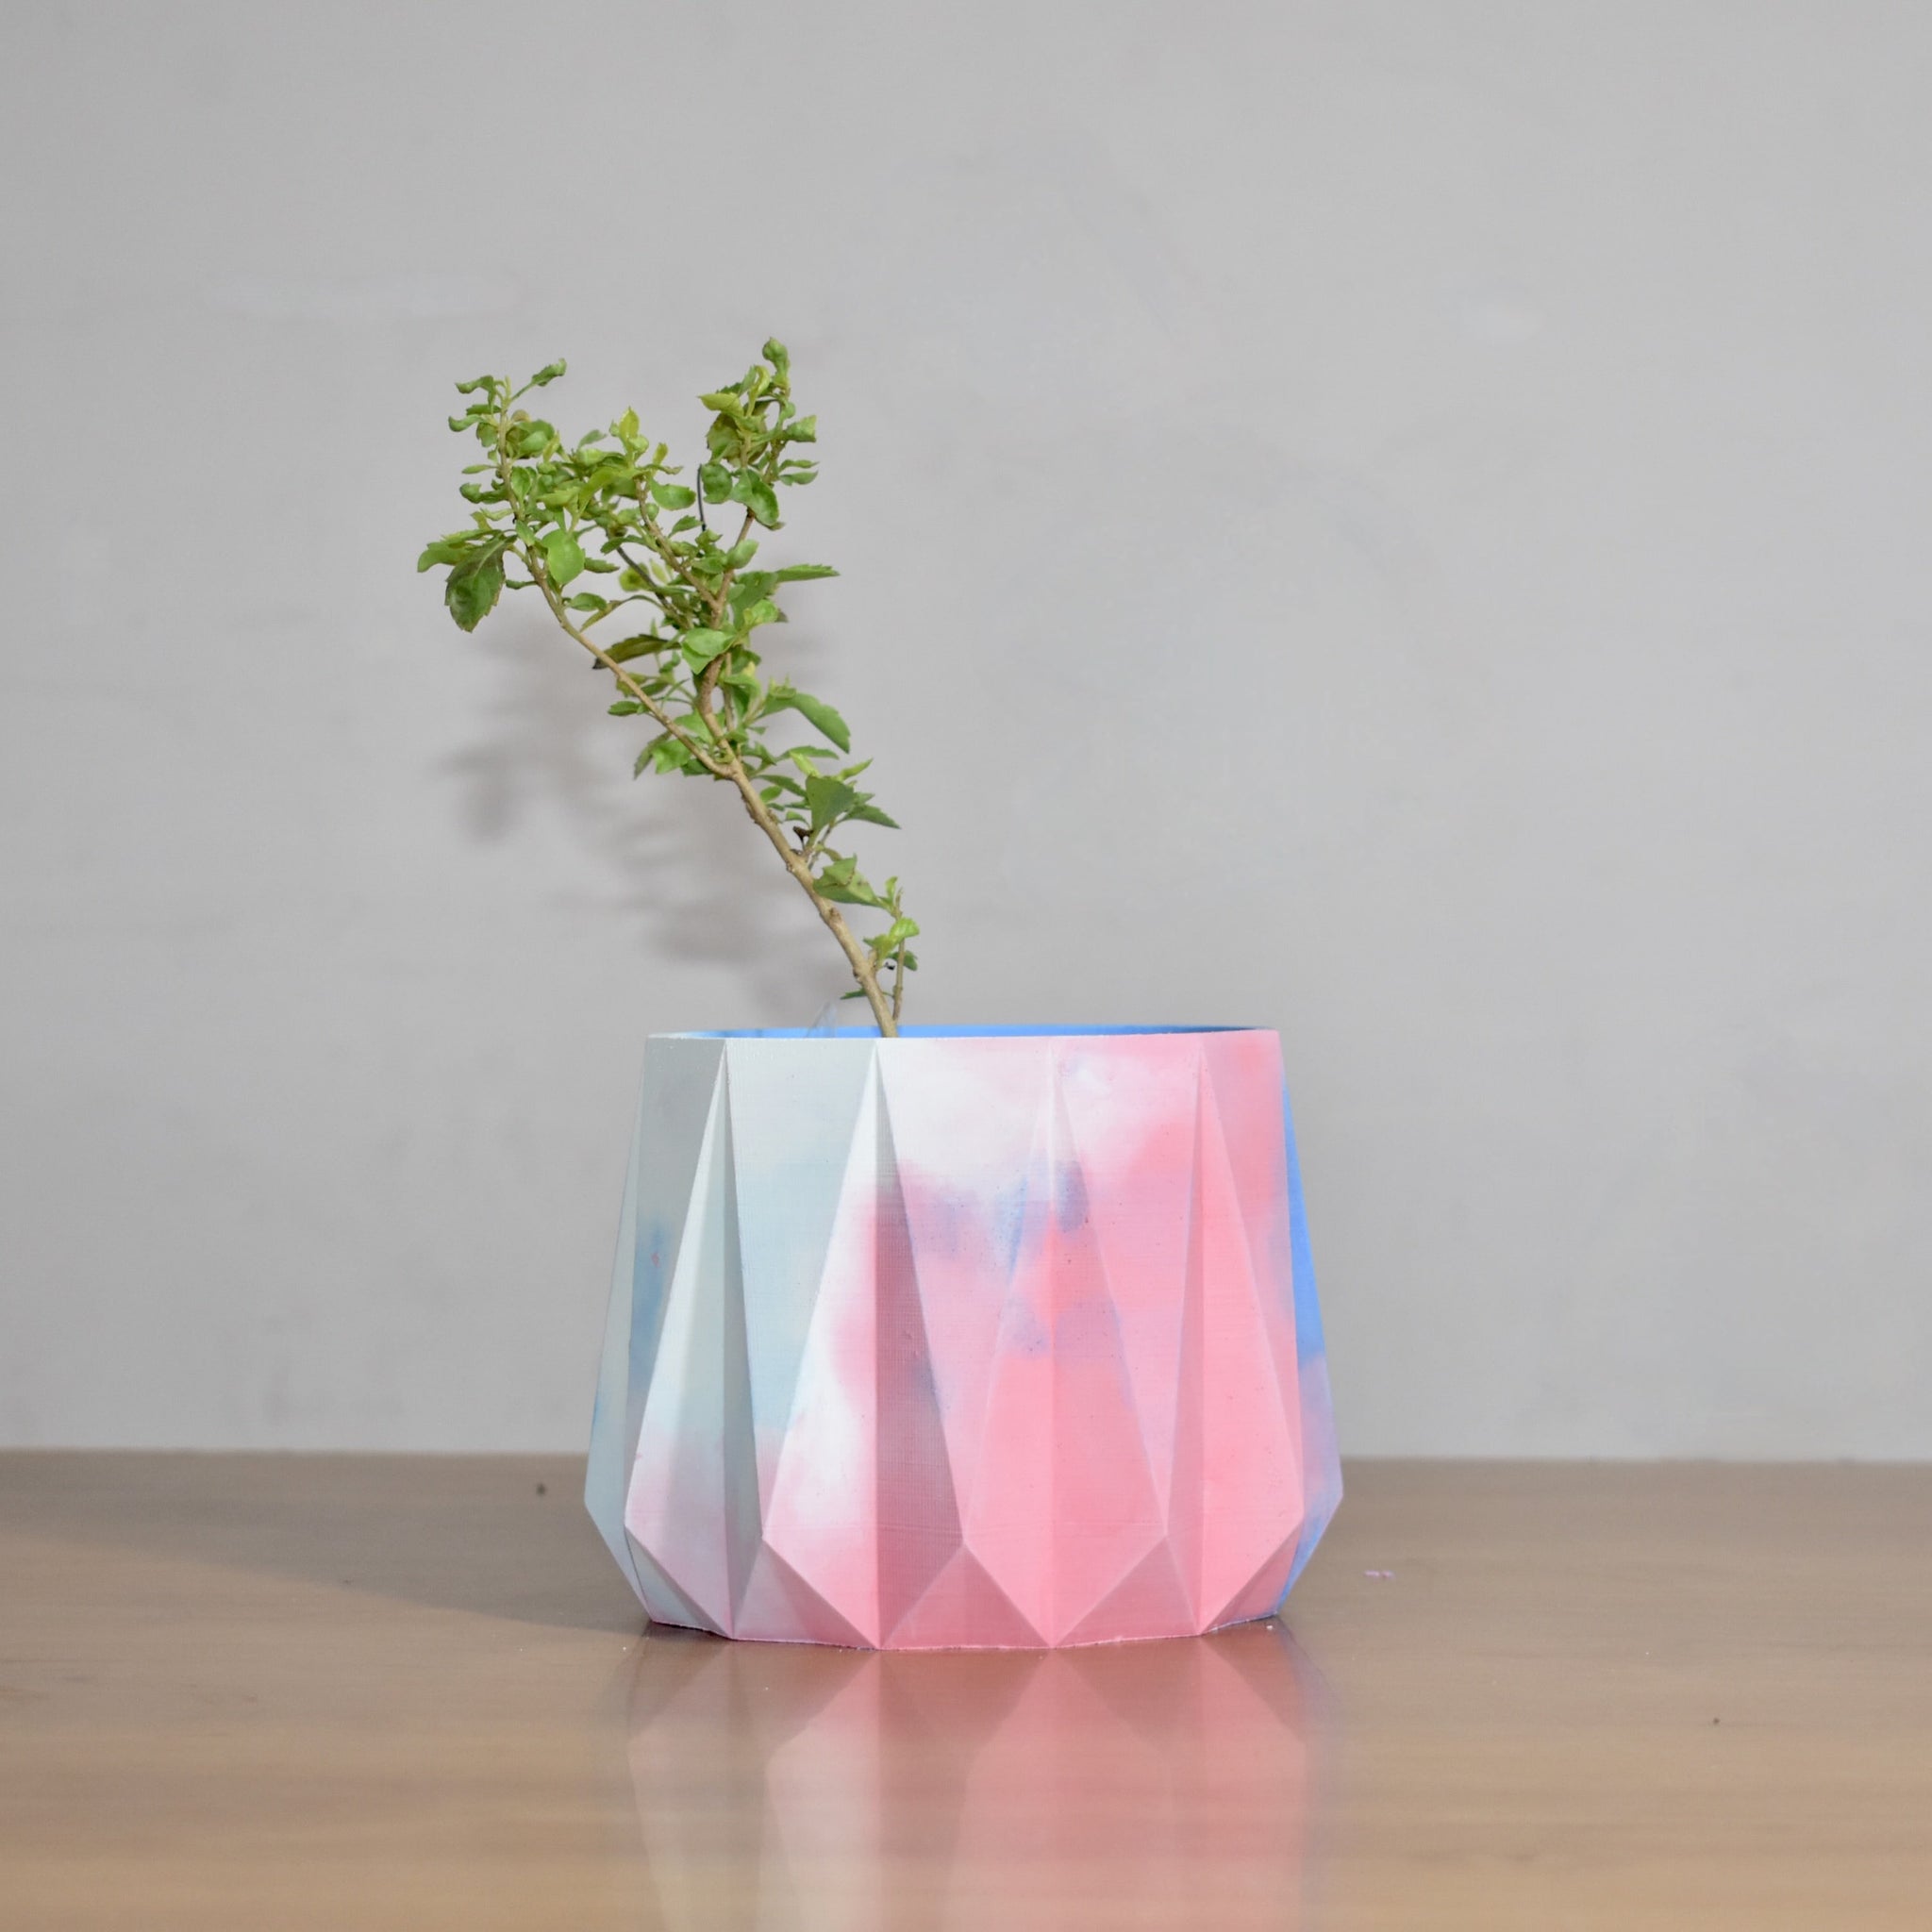 Ruby - Concrete Planter for Office and Home Decoration, Table Top Planter